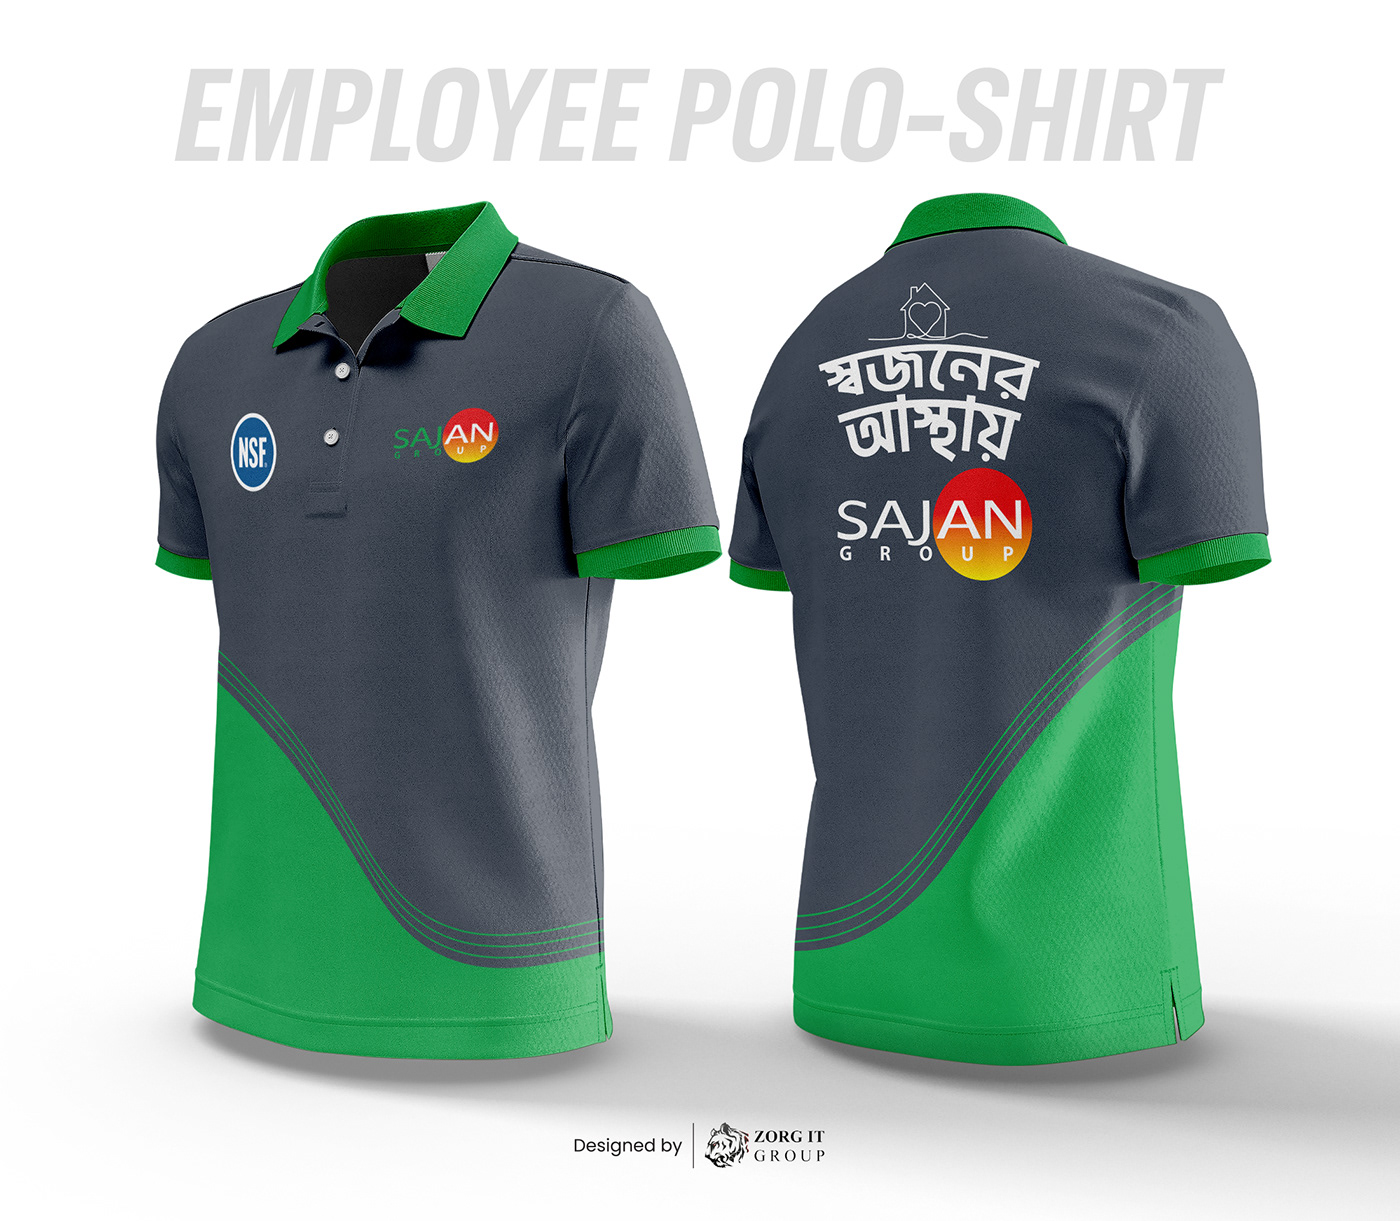 Active shirt, sleeve and t-shirt Design by Zorg IT Group.